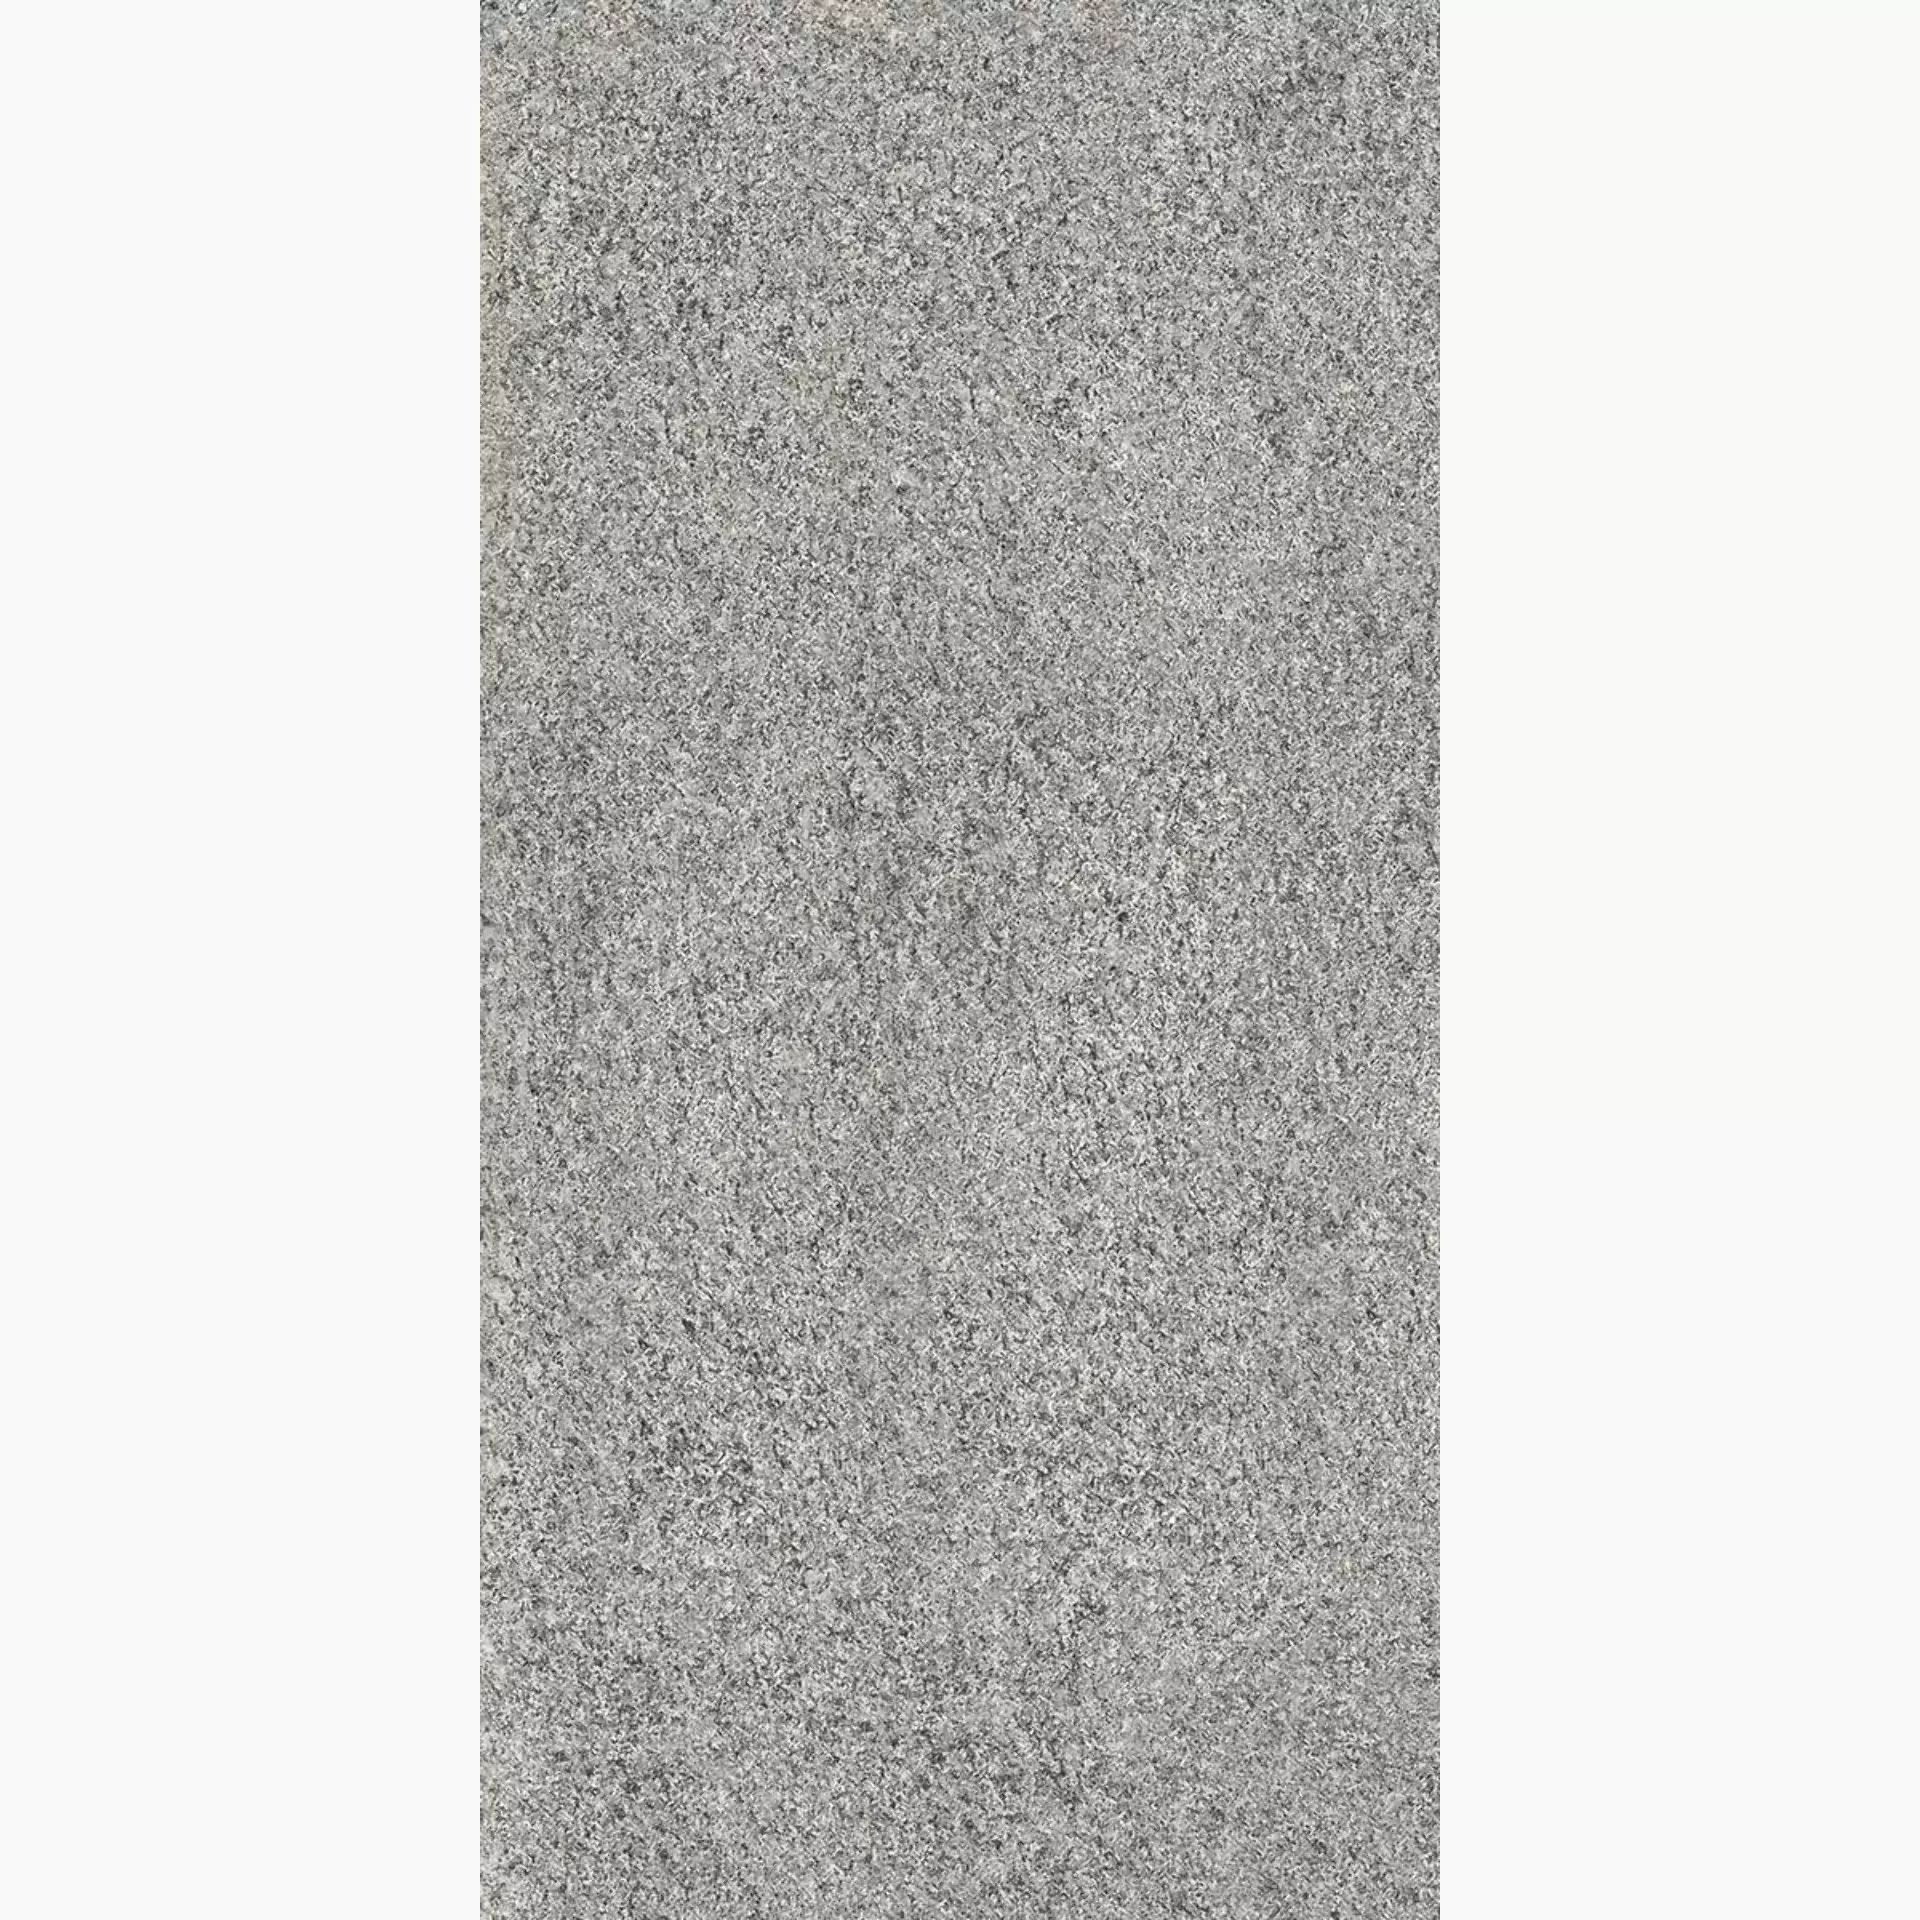 Keope Percorsi Frame Gneiss Grey Strutturato 4932474A 30x60cm rectified 9mm